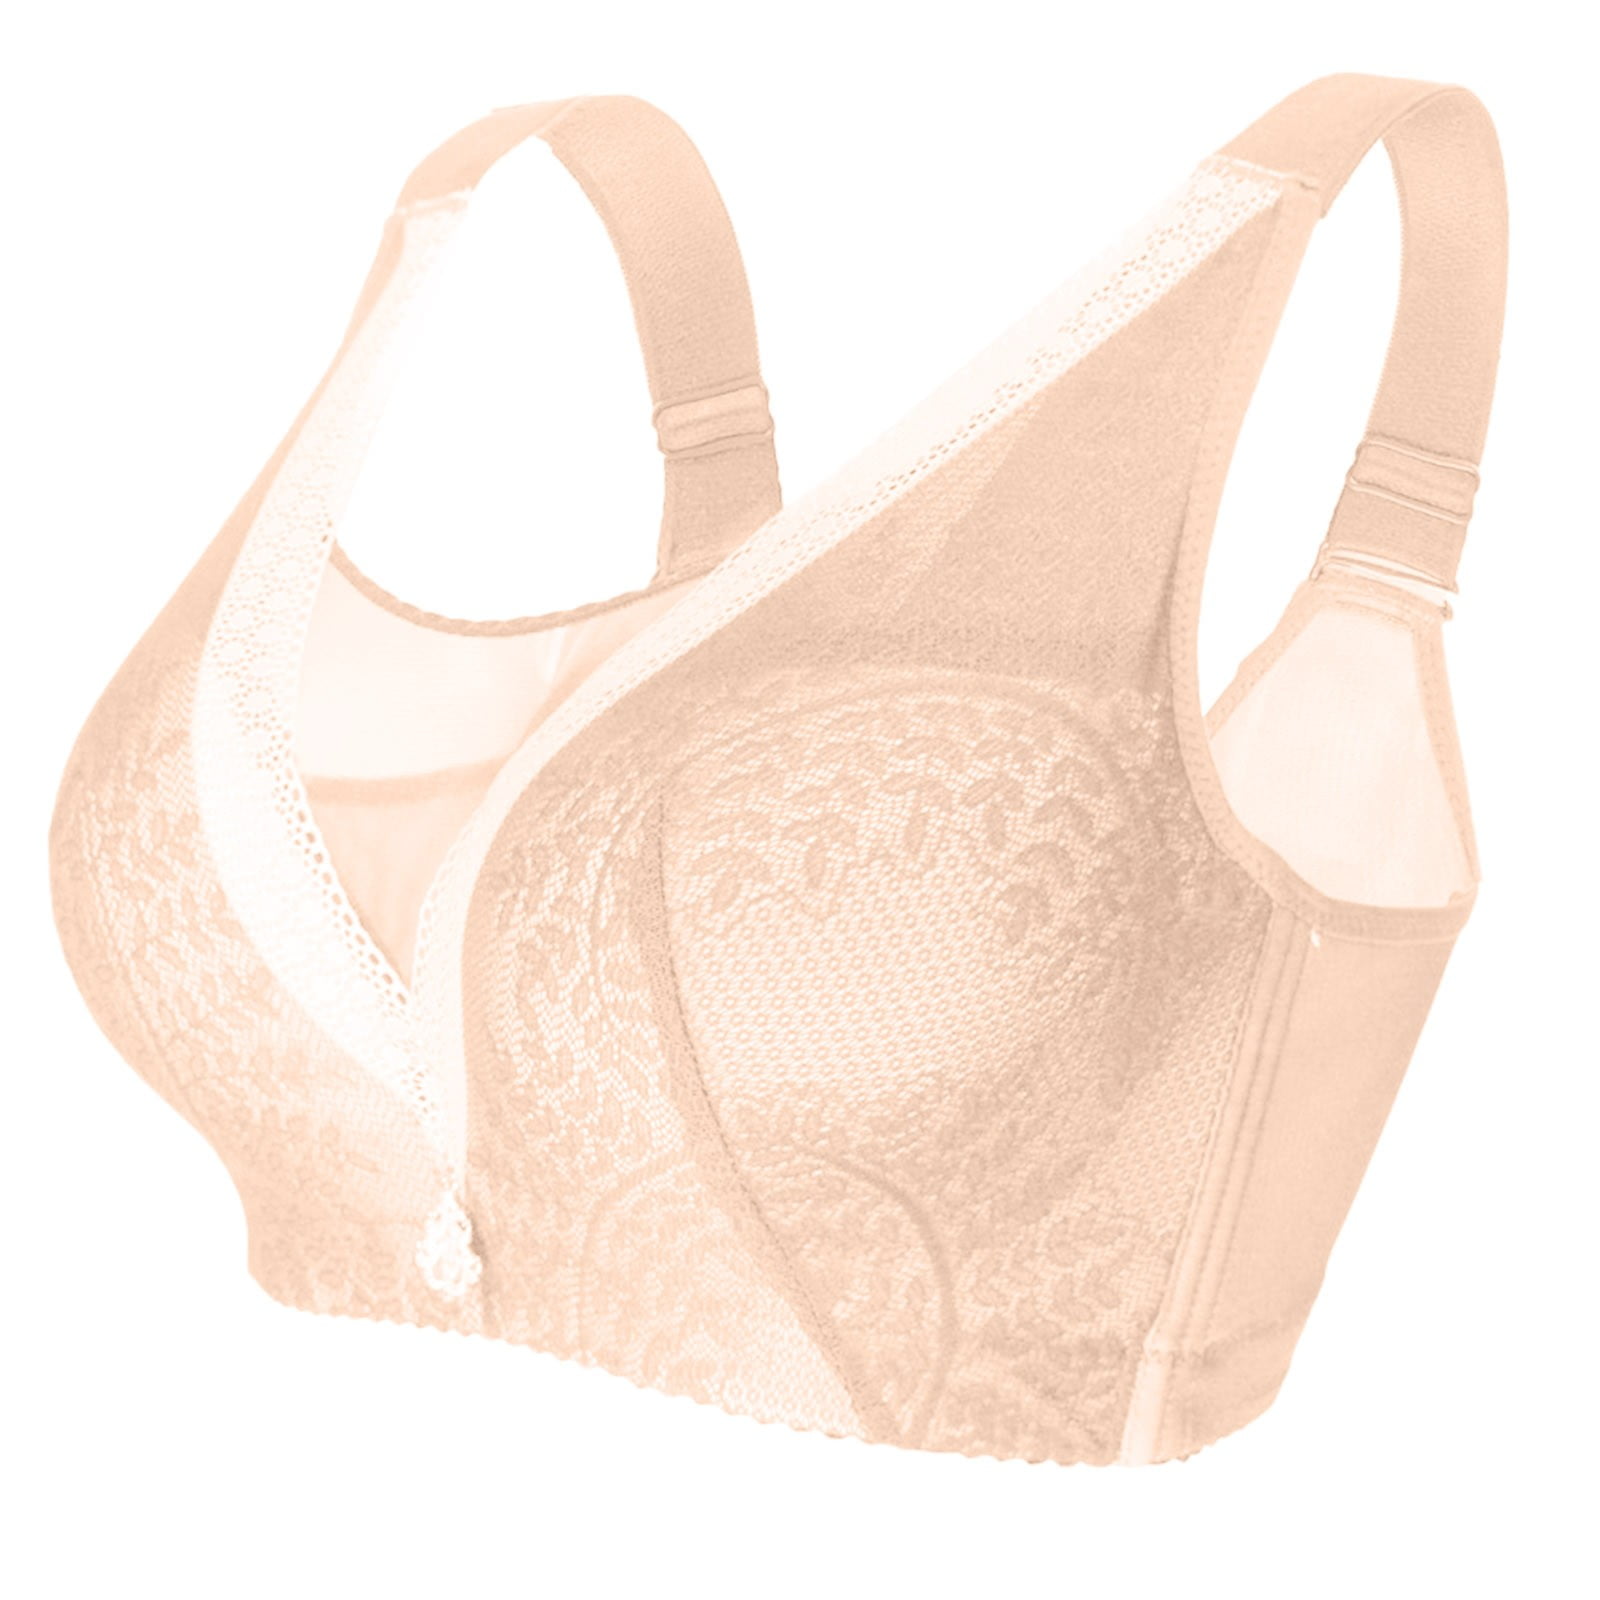 Bras for Women Padded Push Up Bra Embroidered Lace Bra Add Cups